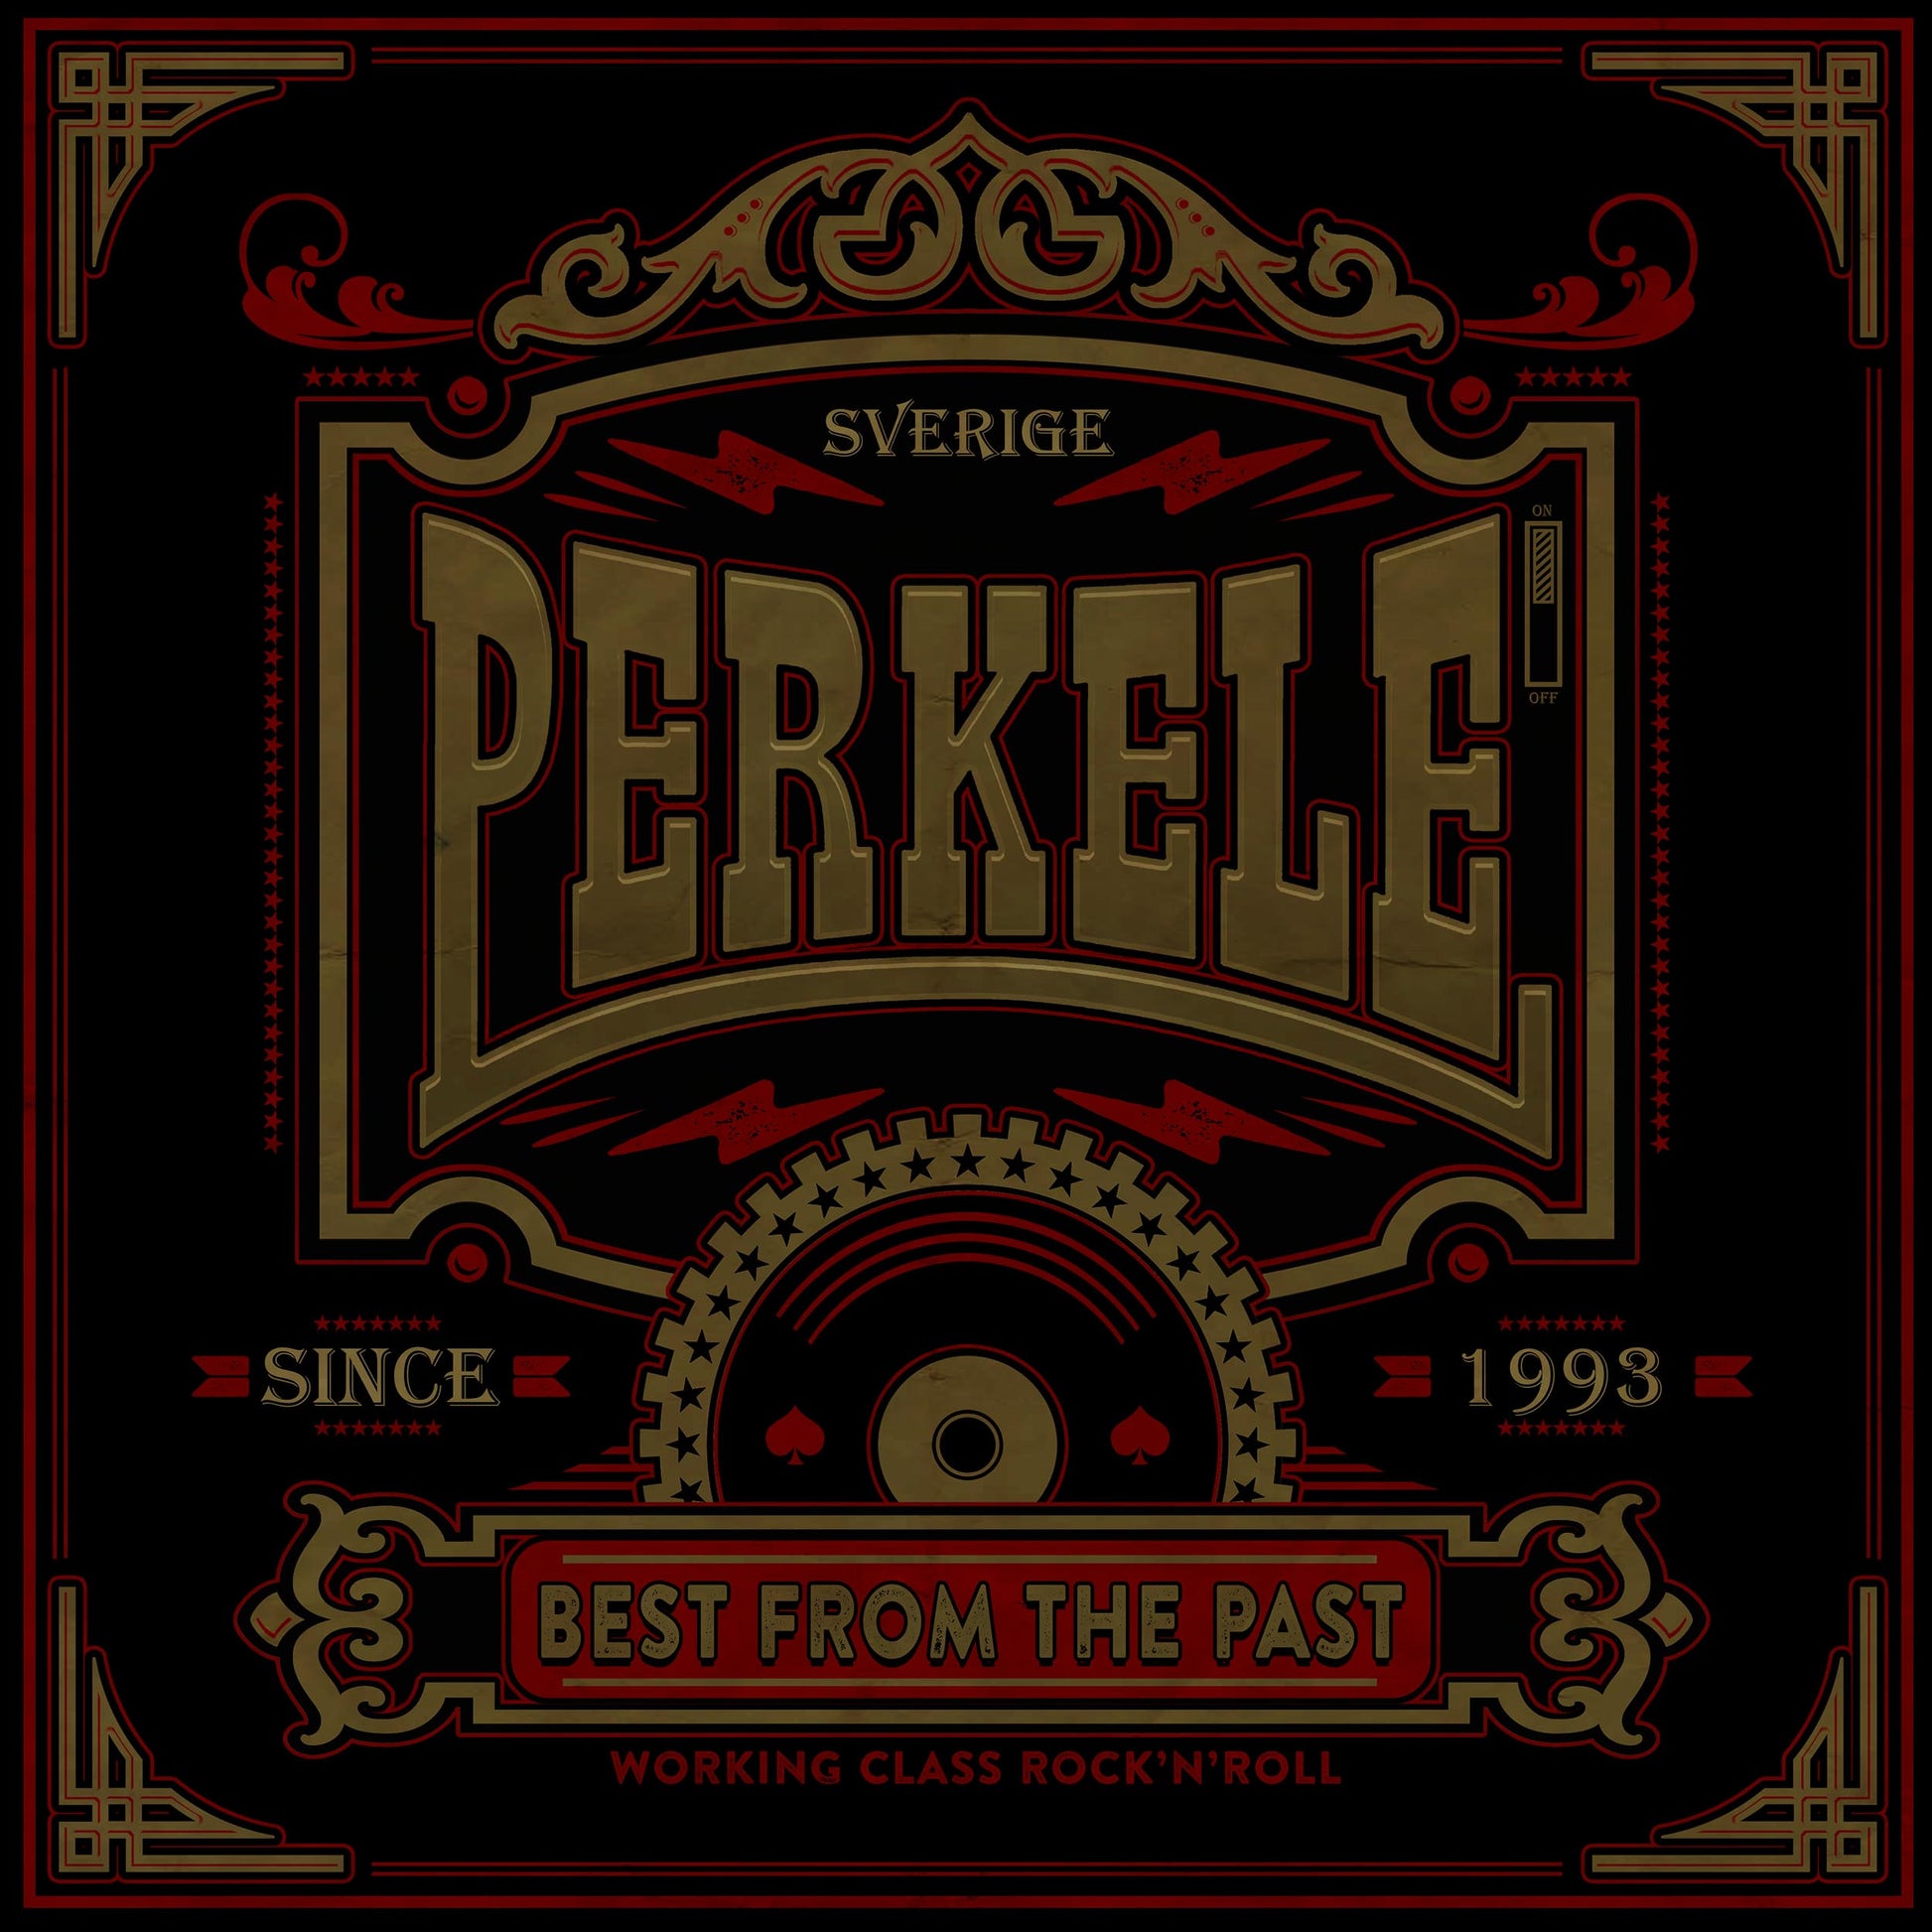 Perkele "Best from the past" CD (DigiPac)